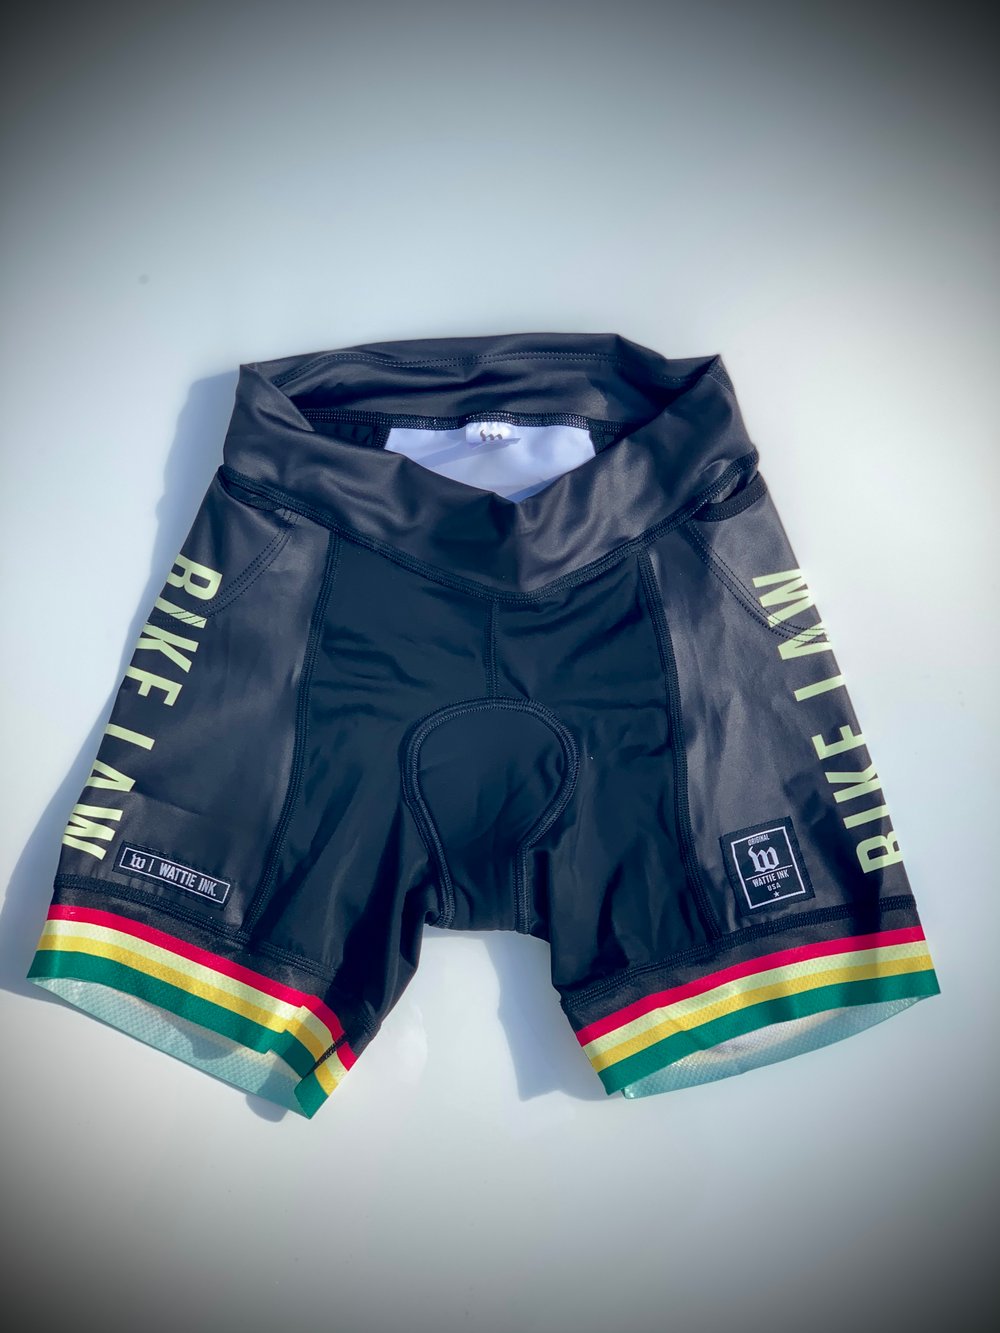 Image of Classic Edition Tri-Short/Bottom - Men's - Only Smalls Left